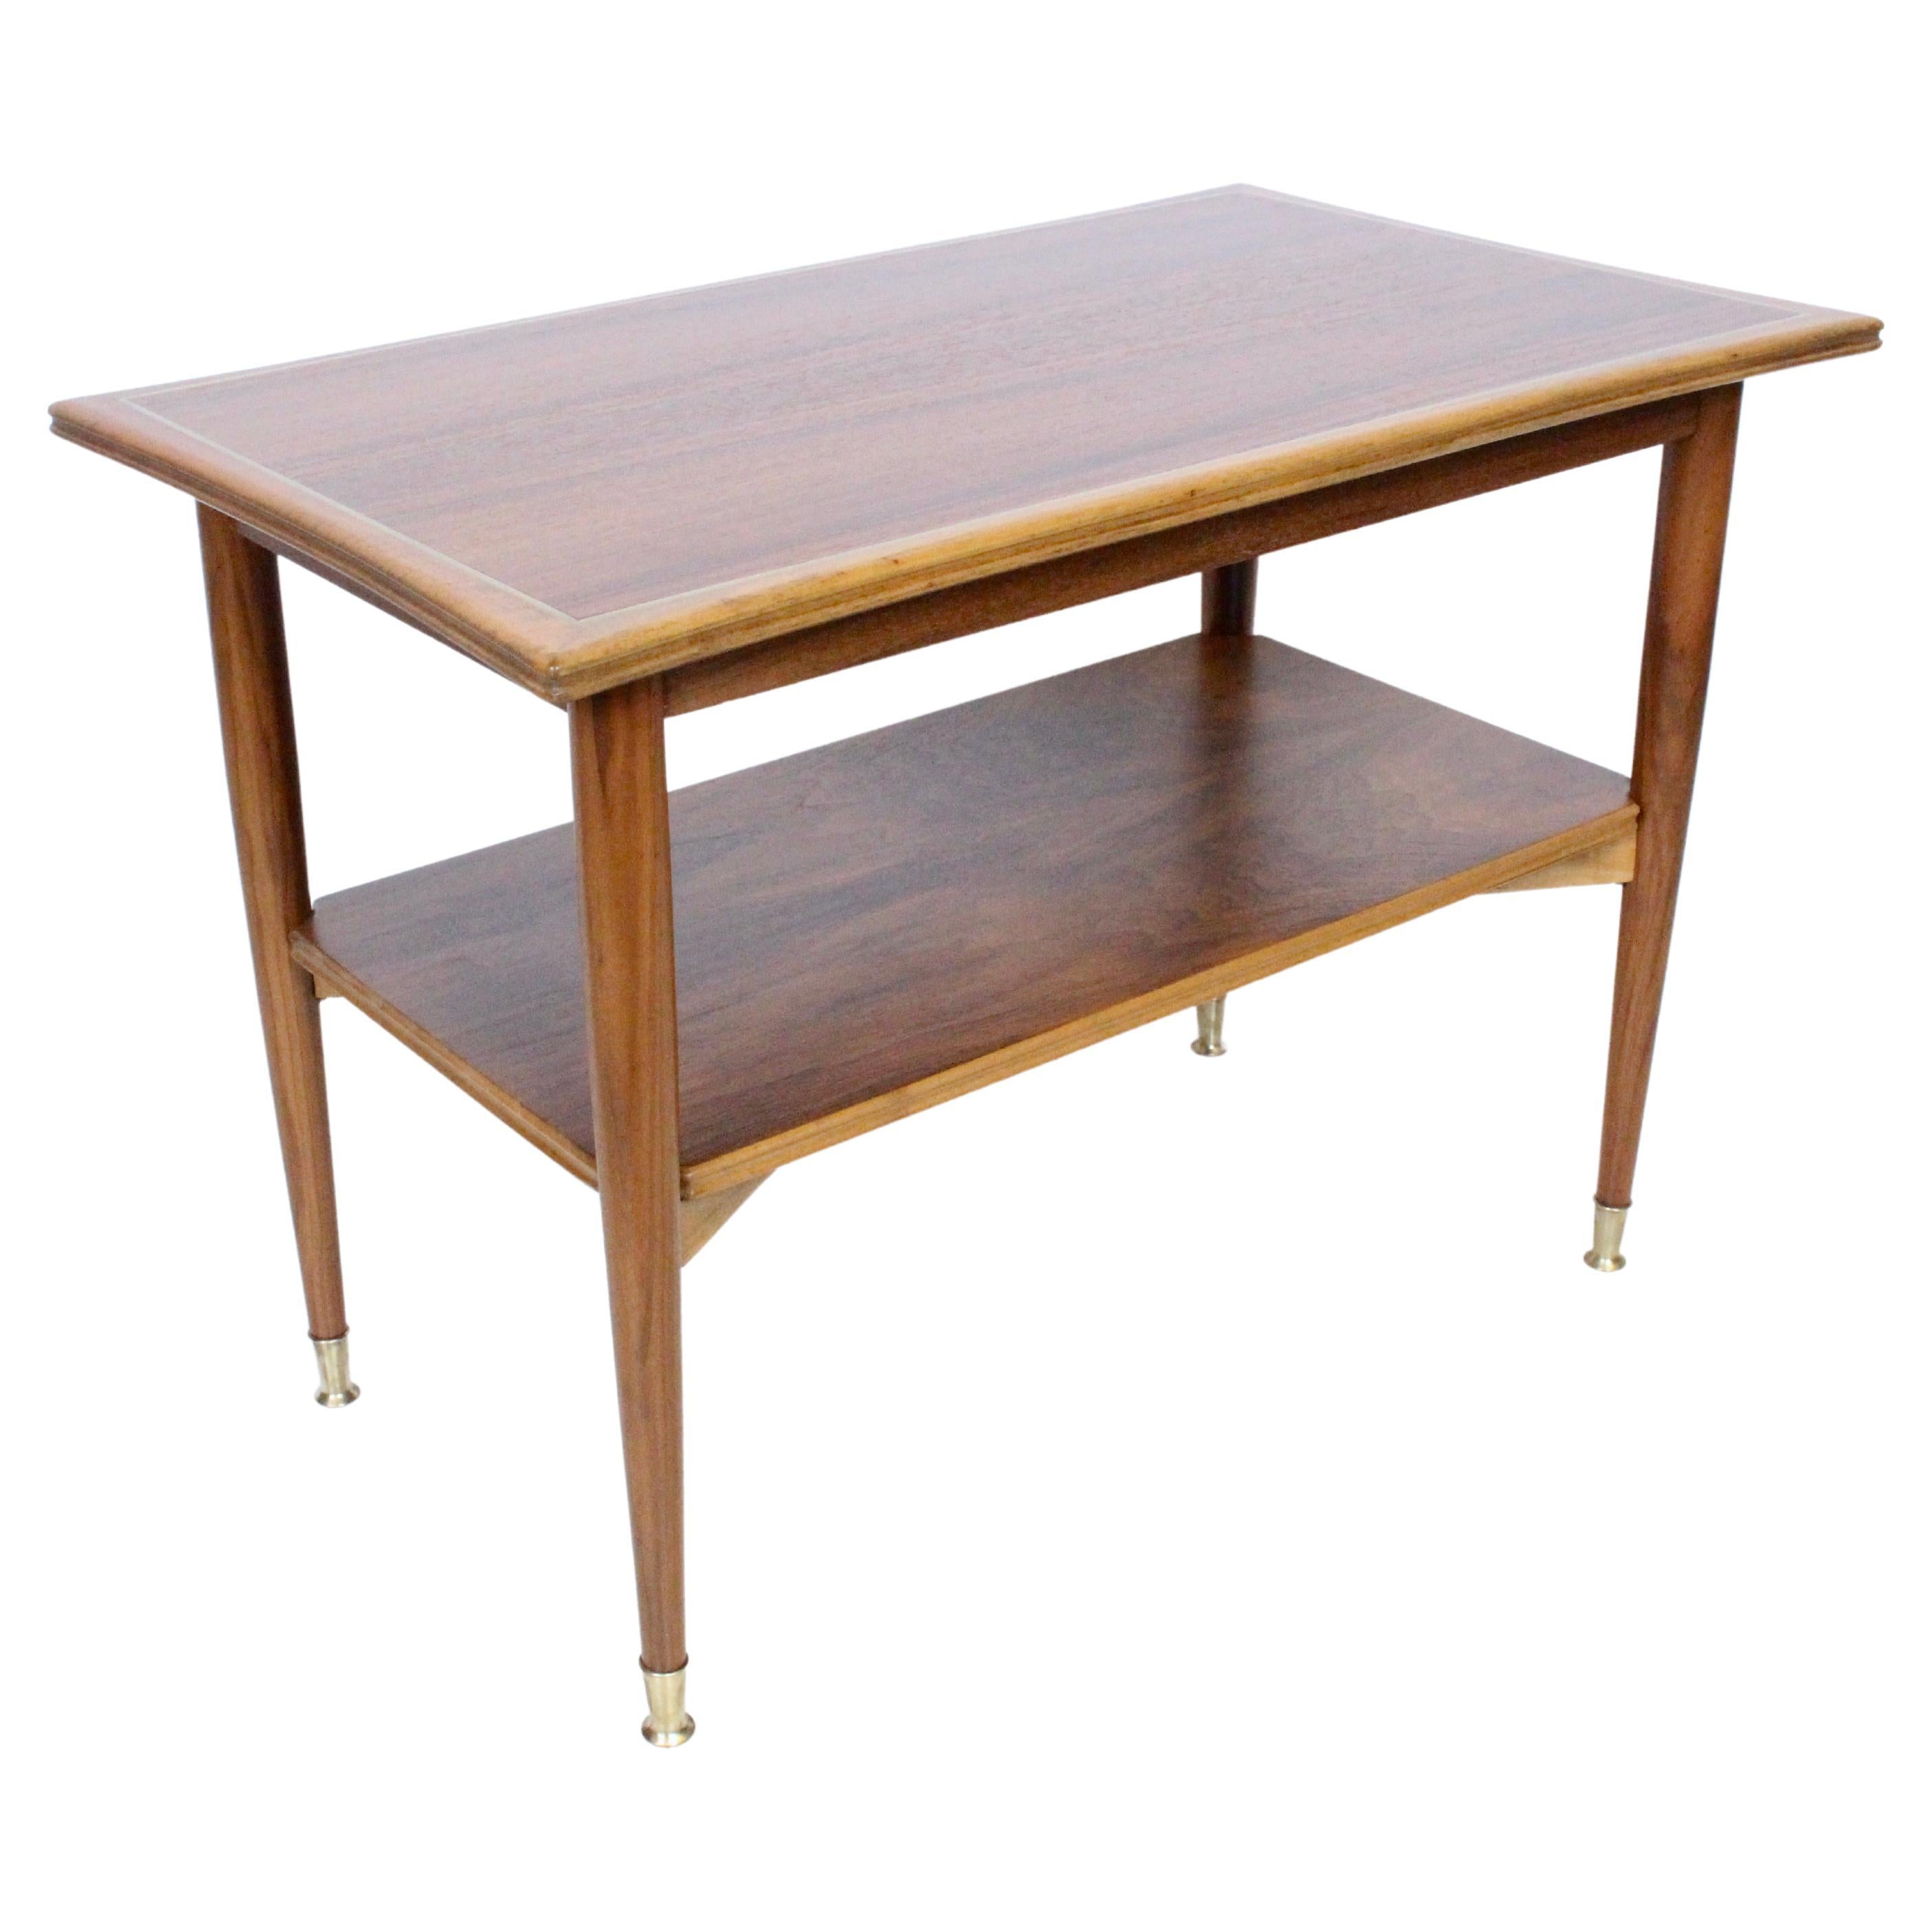 Italian Modern Guglielmo Ulrich style flared edge two tier palisander and fruitwood rimmed coffee table with brass inlay, 1950's. Featuring a rectangular banded Palisander veneer surface, framed with smooth flared Fruitwood edges, and inlaid Brass.